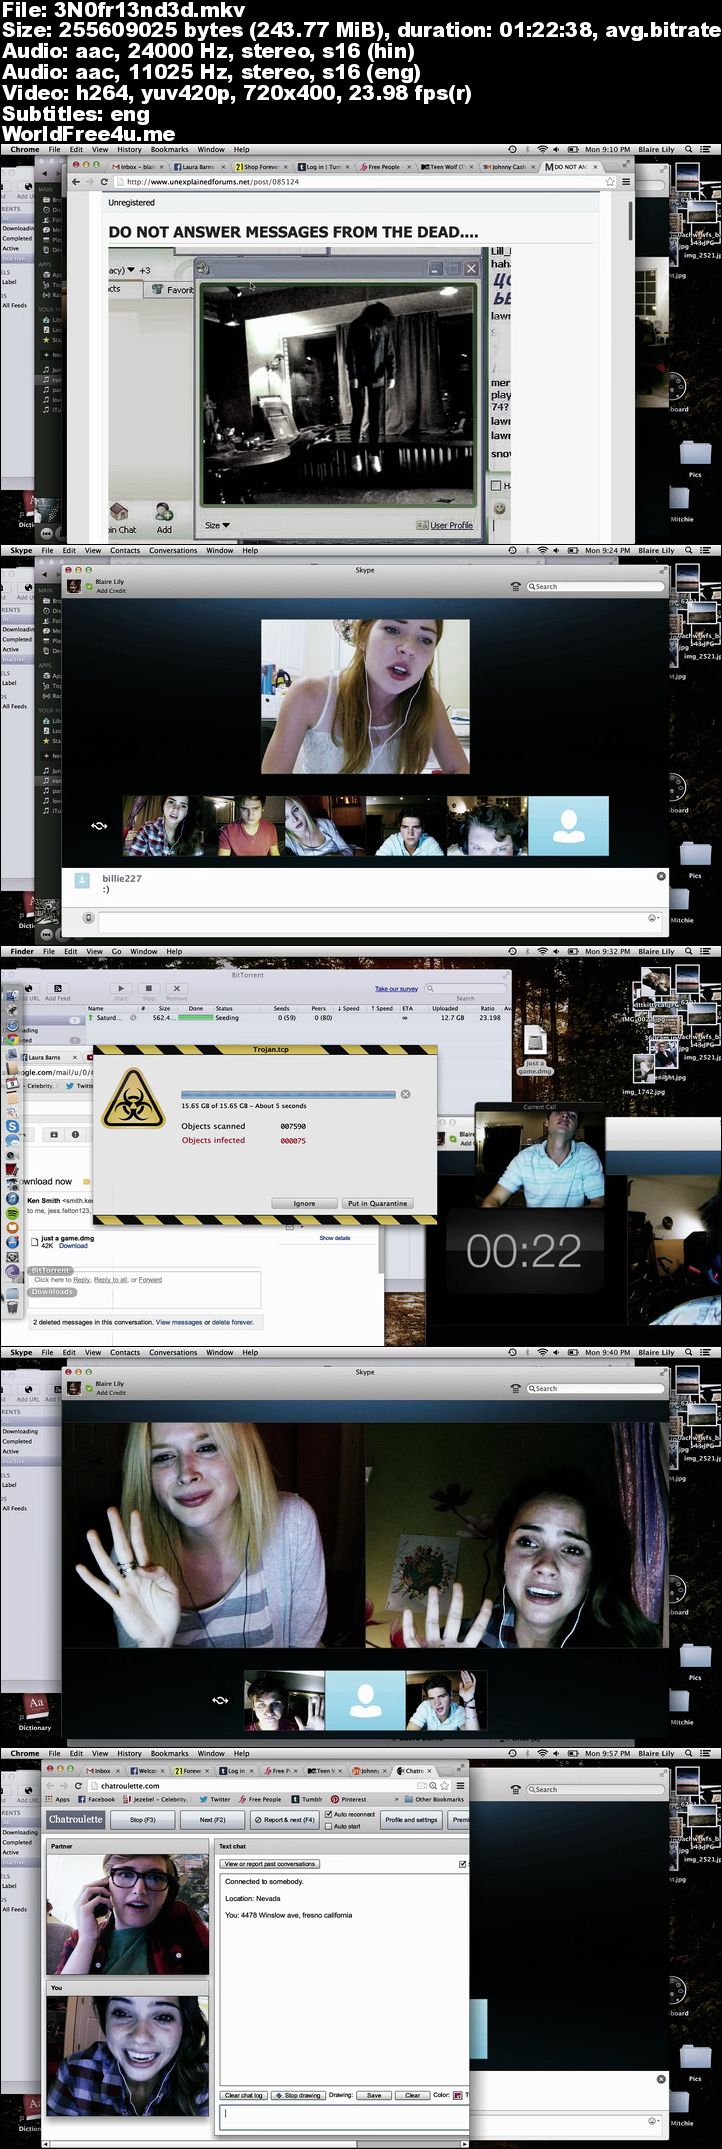 Unfriended Full Movie No Download